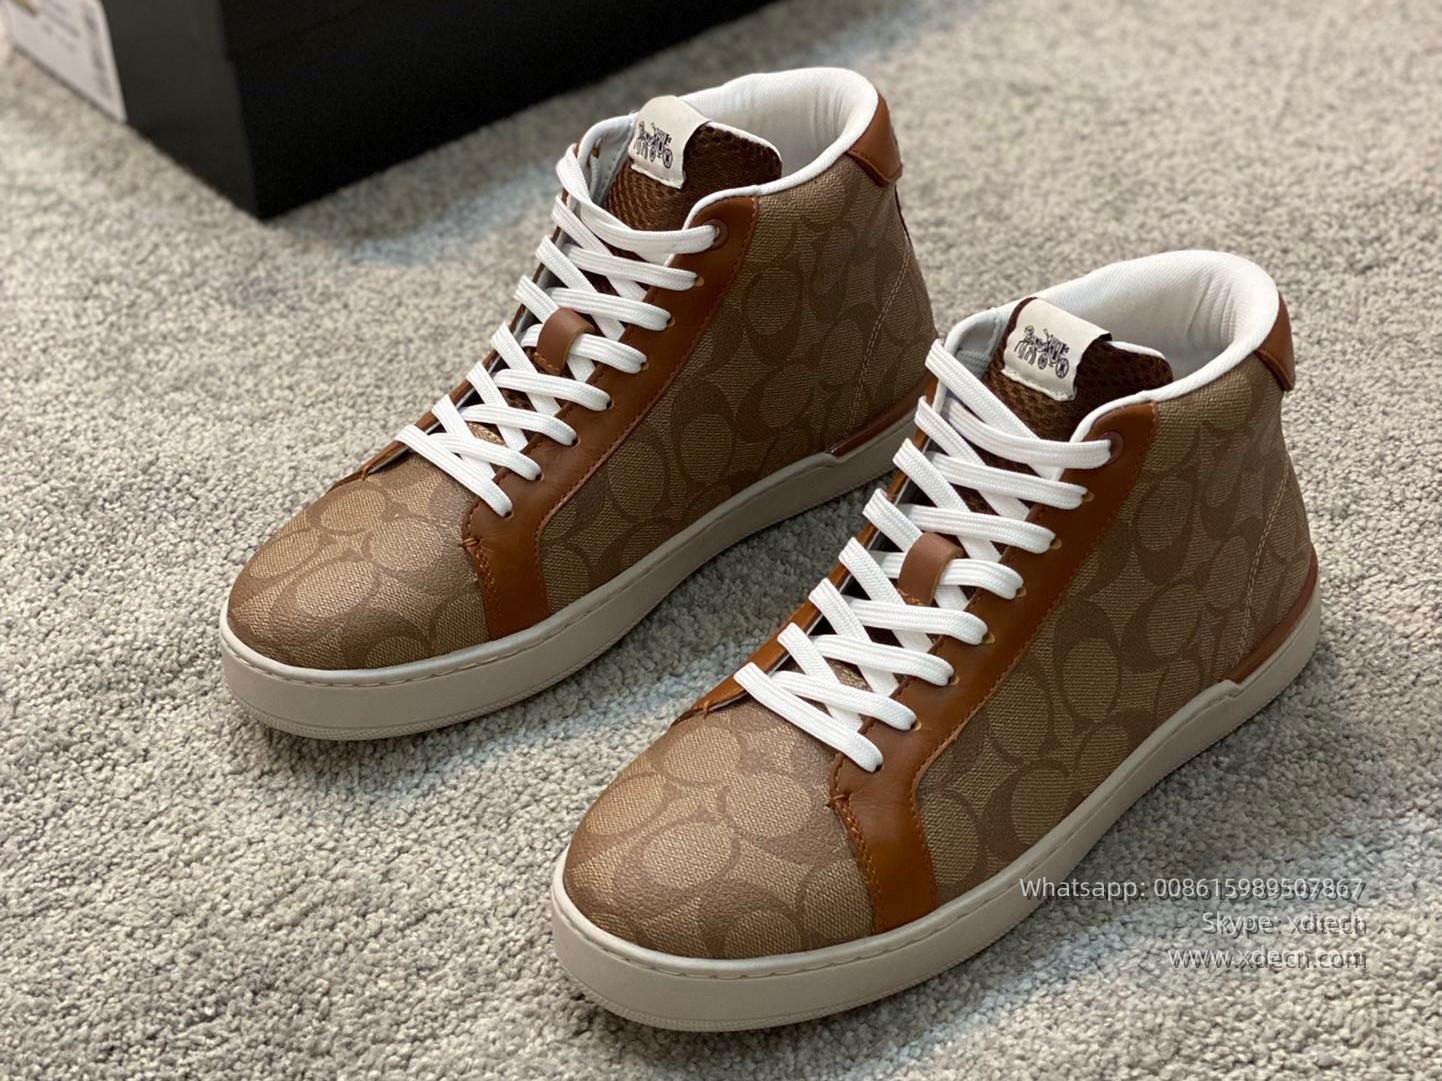 Coach Sneakers Middle Boots 4